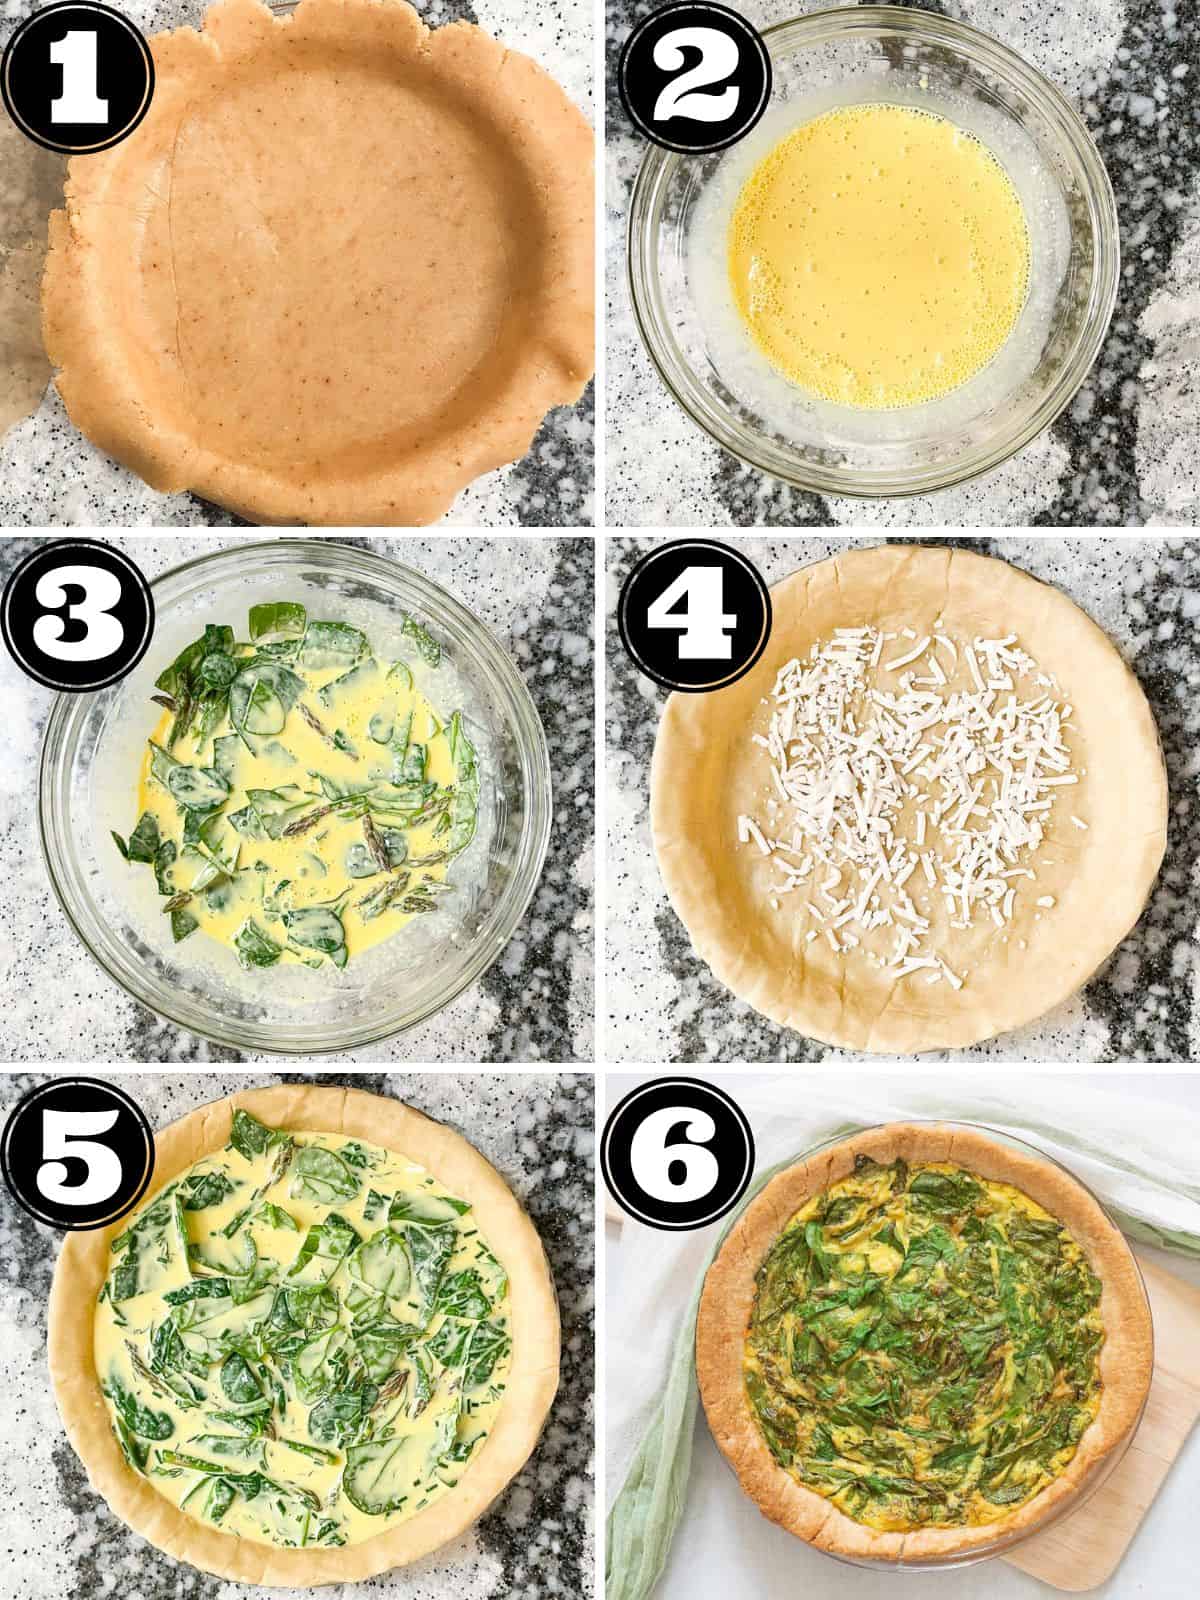 Photo steps of making a just egg quiche.